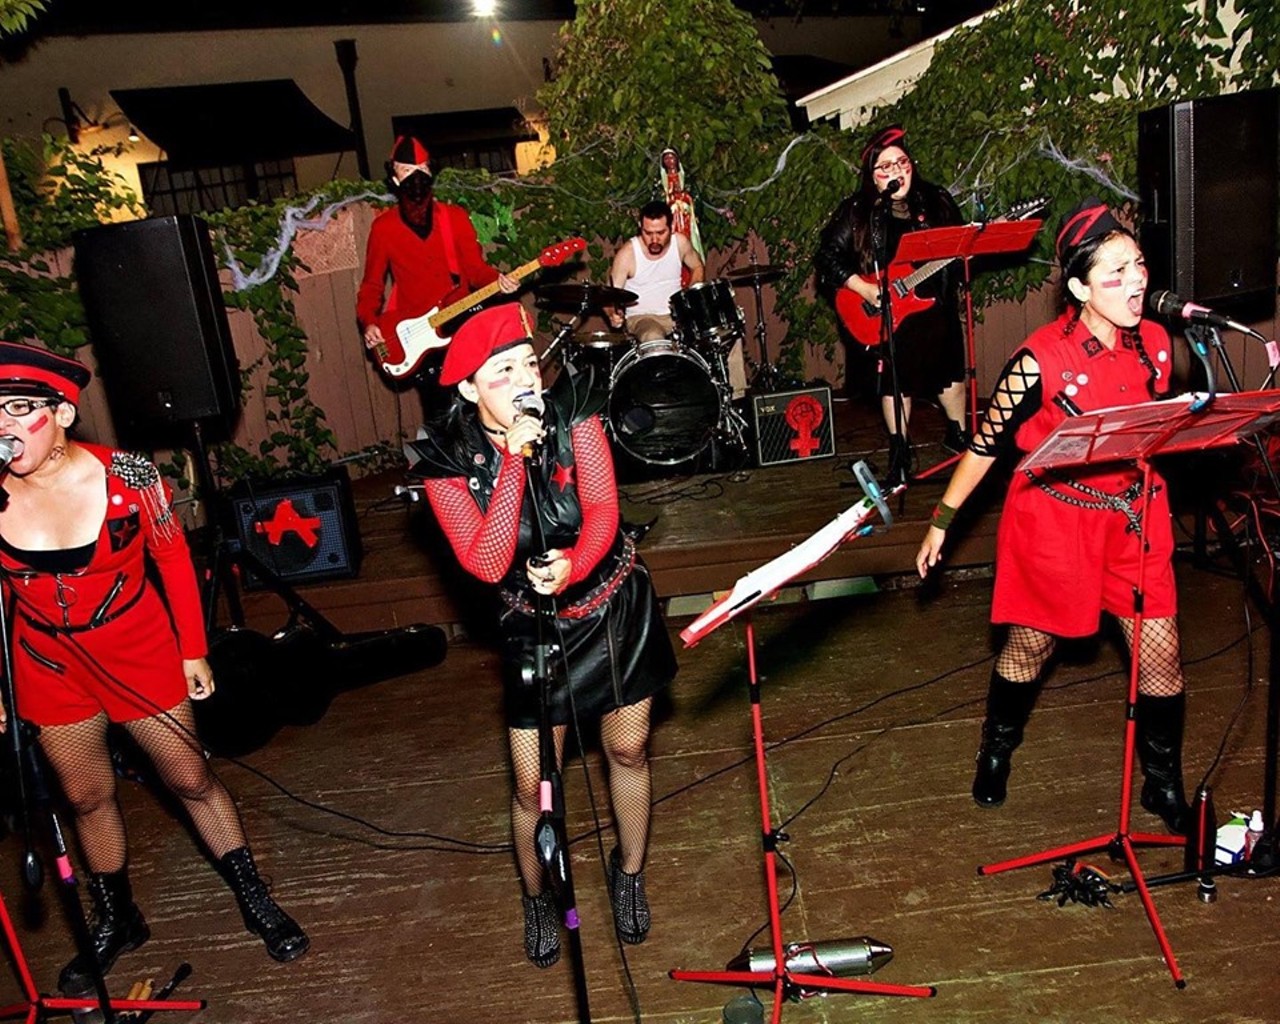 La BotanicaThis queer, feminist vegan eatery and community gathering space was also the venue for some forward-thinking events during the 2010s, including drag shows and Chicana punk festivals. Pictured here: The Canción Cannibal Cabaret performing at Black and Brown Punk Fest TX 2018